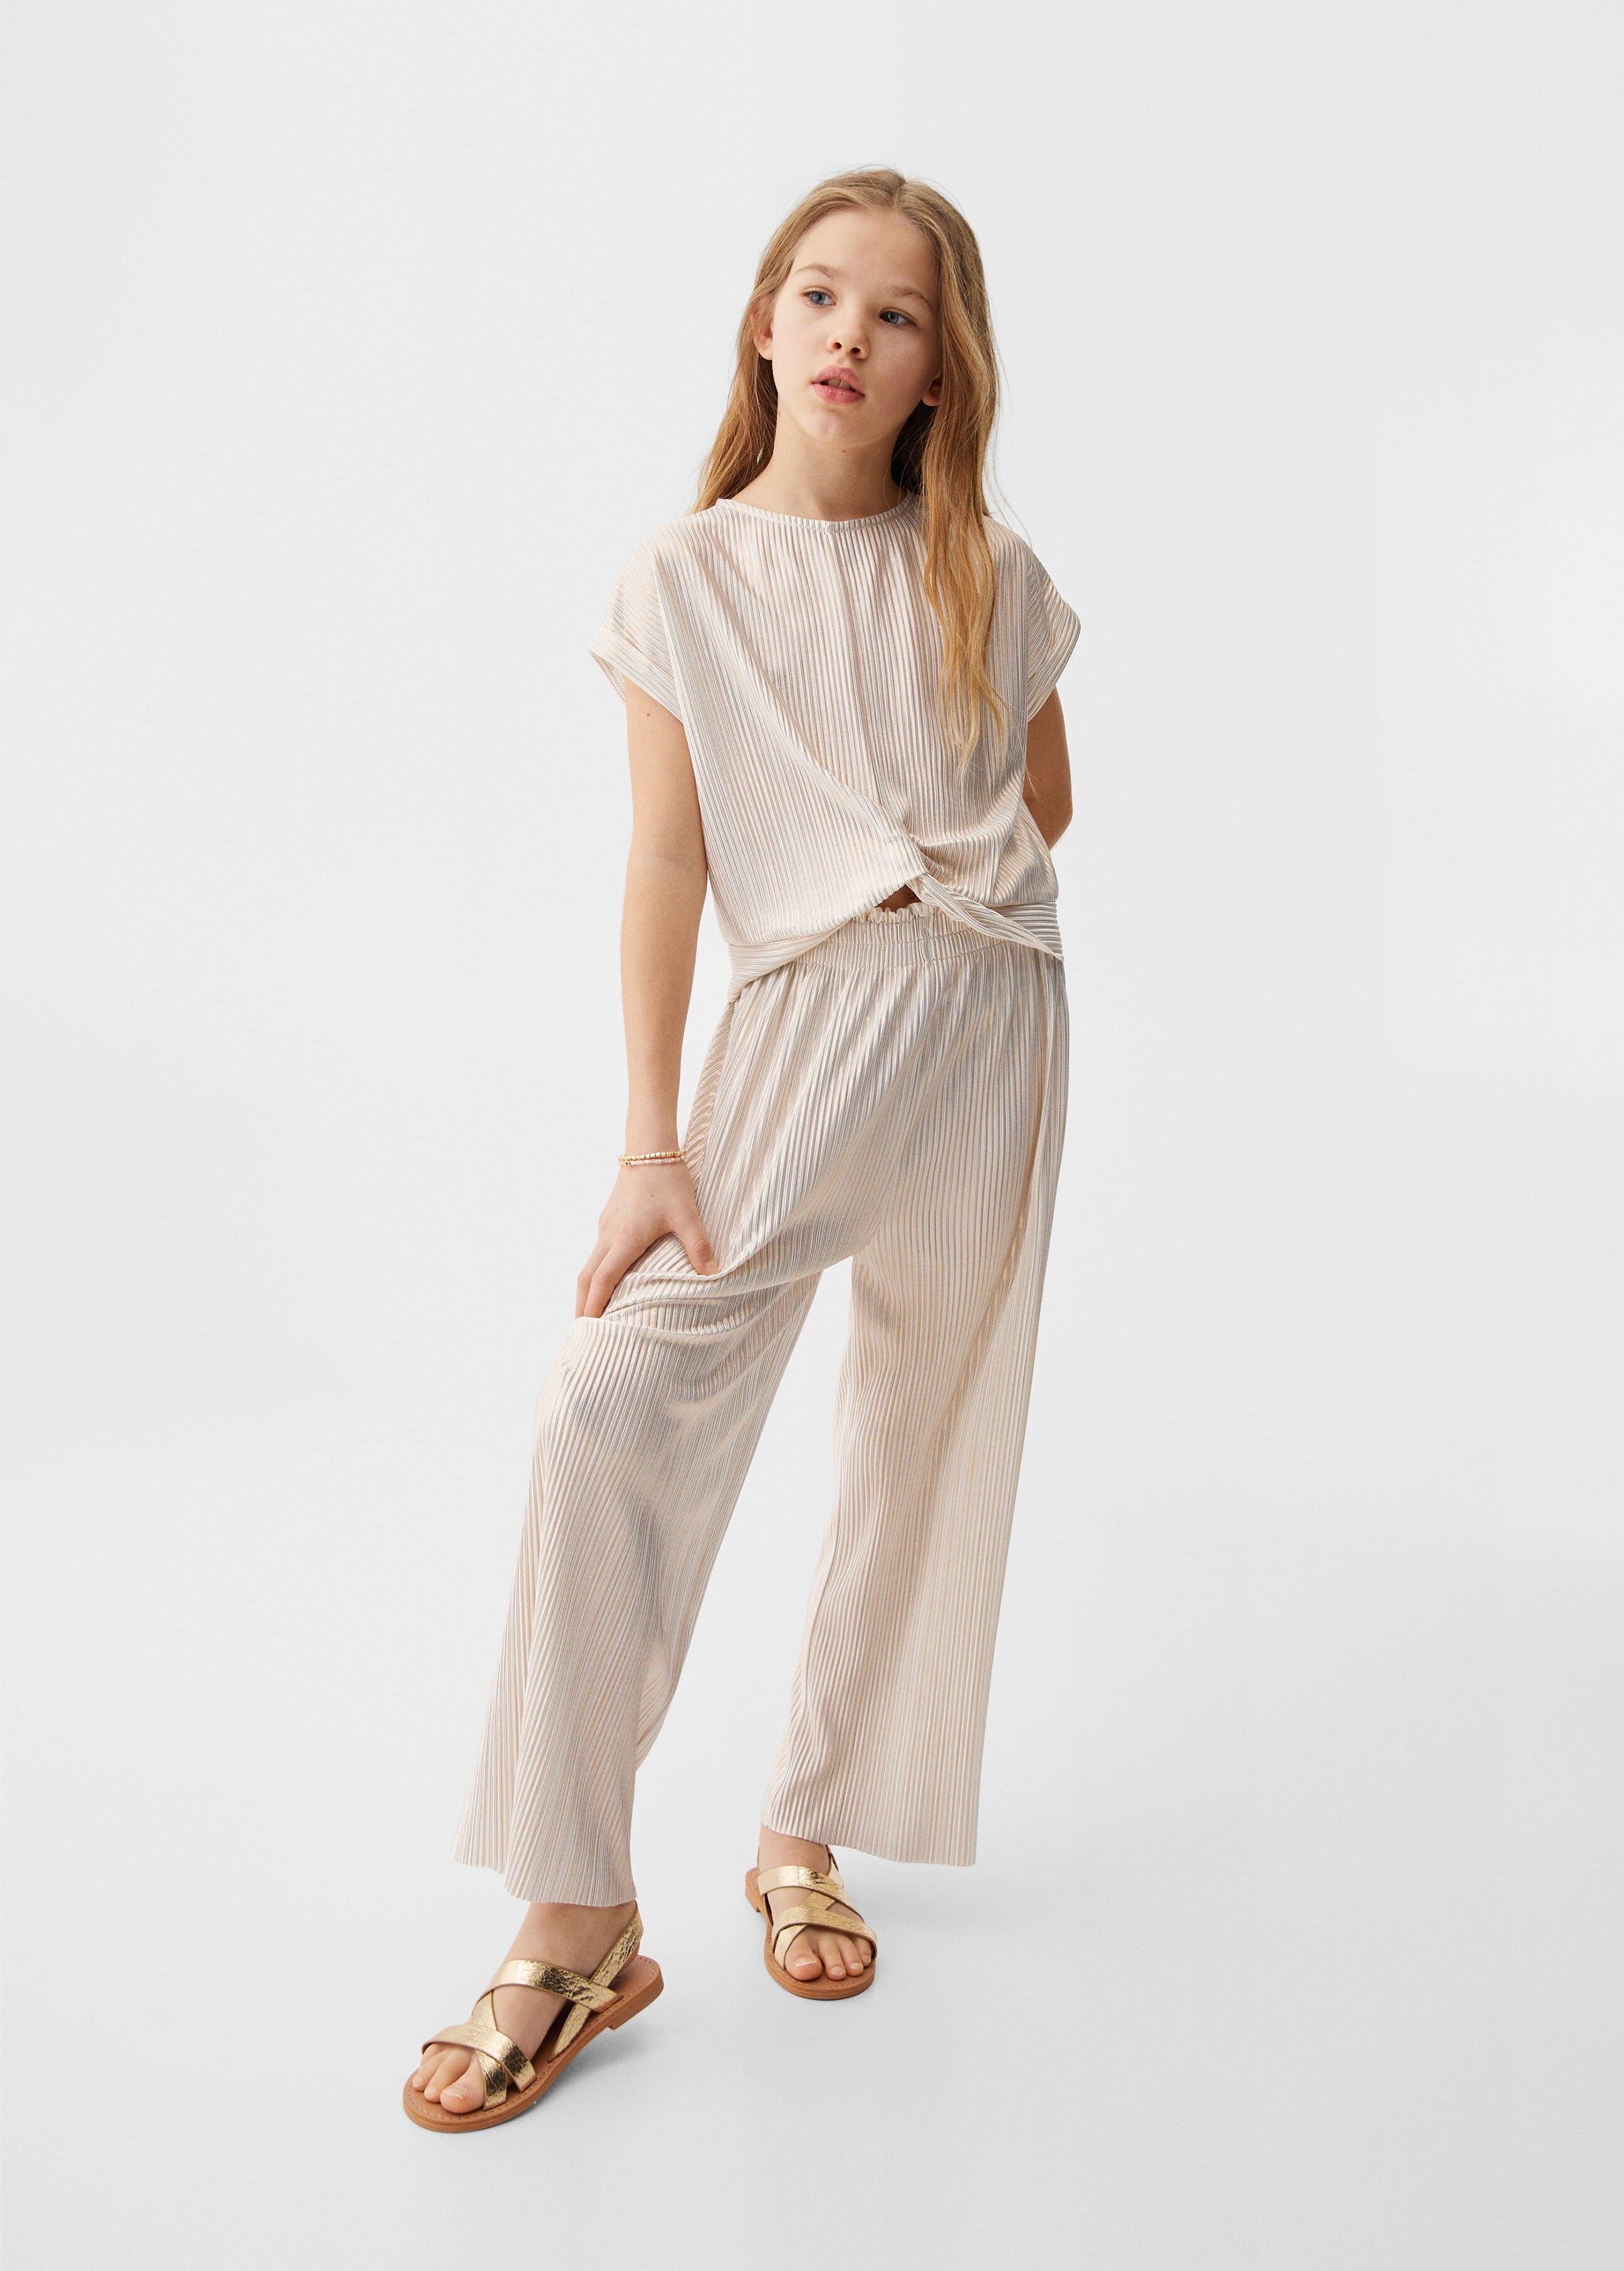 Pleated lurex trousers - General plane